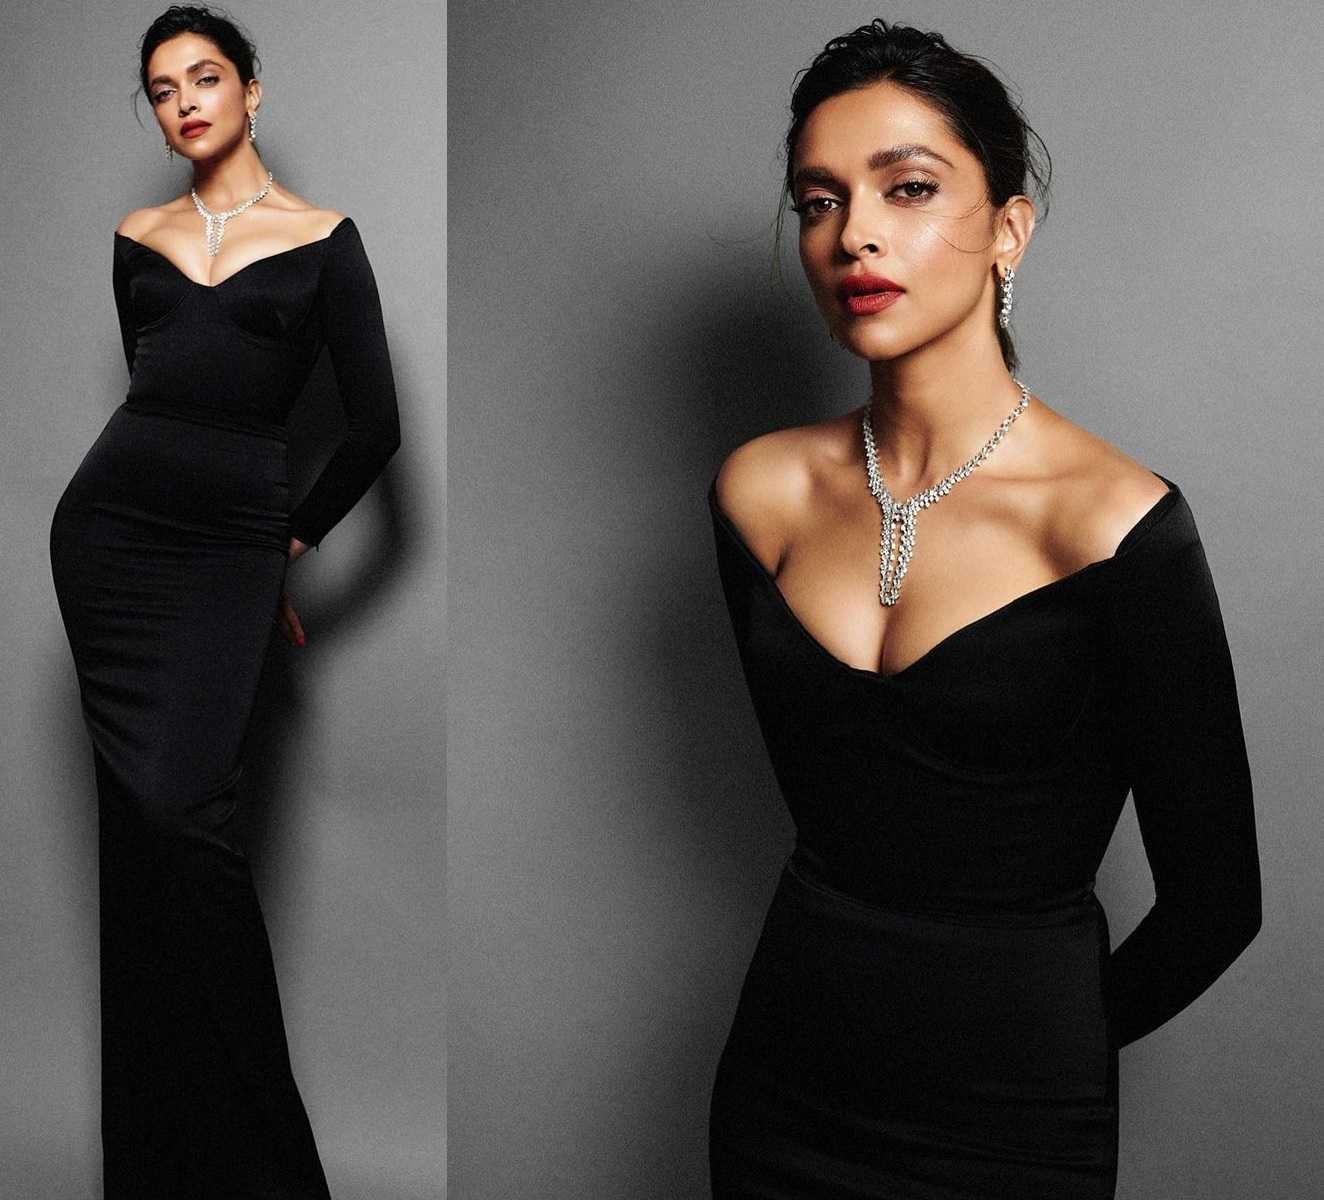 Cannes 2022: Deepika Padukone dazzles in black bodycon dress, here's round-up of her looks from Day 1 to Day 5 